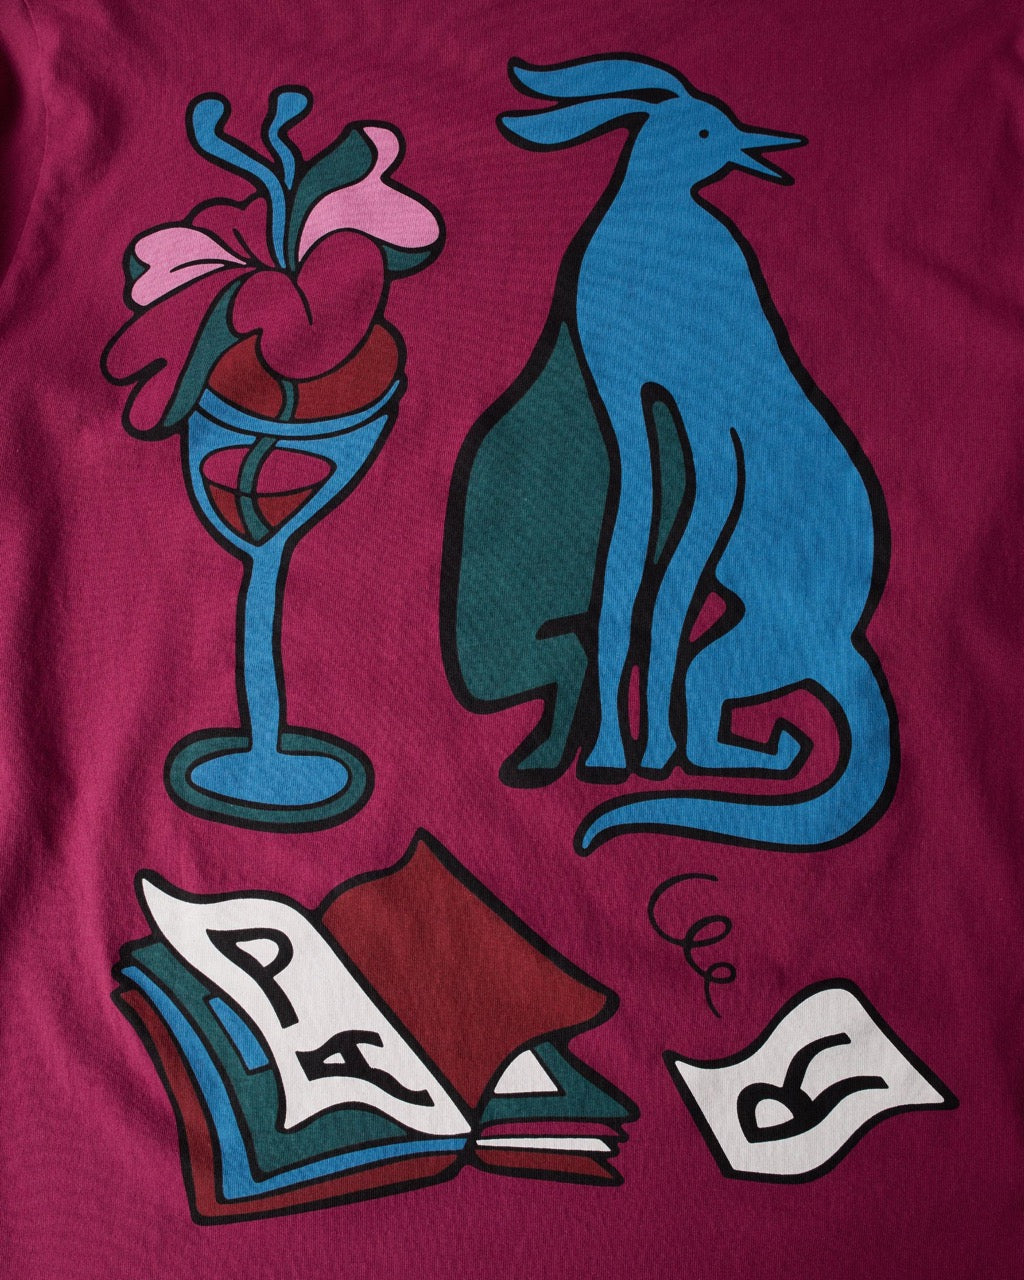 by Parra Wine and Books L/S Tee